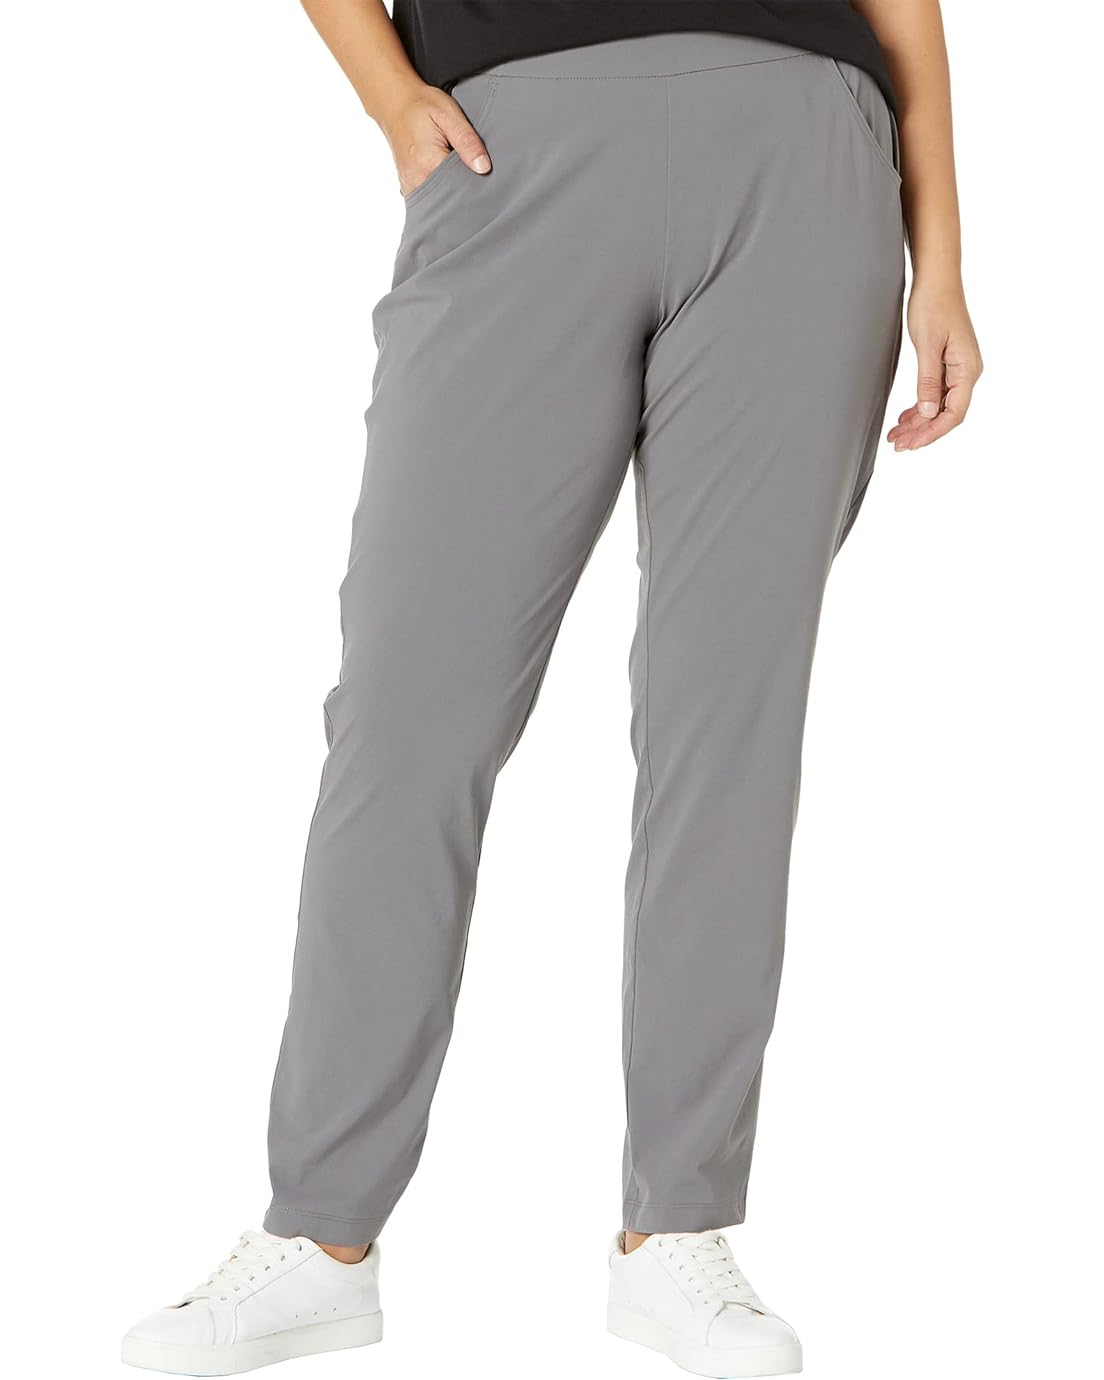 Columbia Plus Size Anytime Casual Pull-On Pants